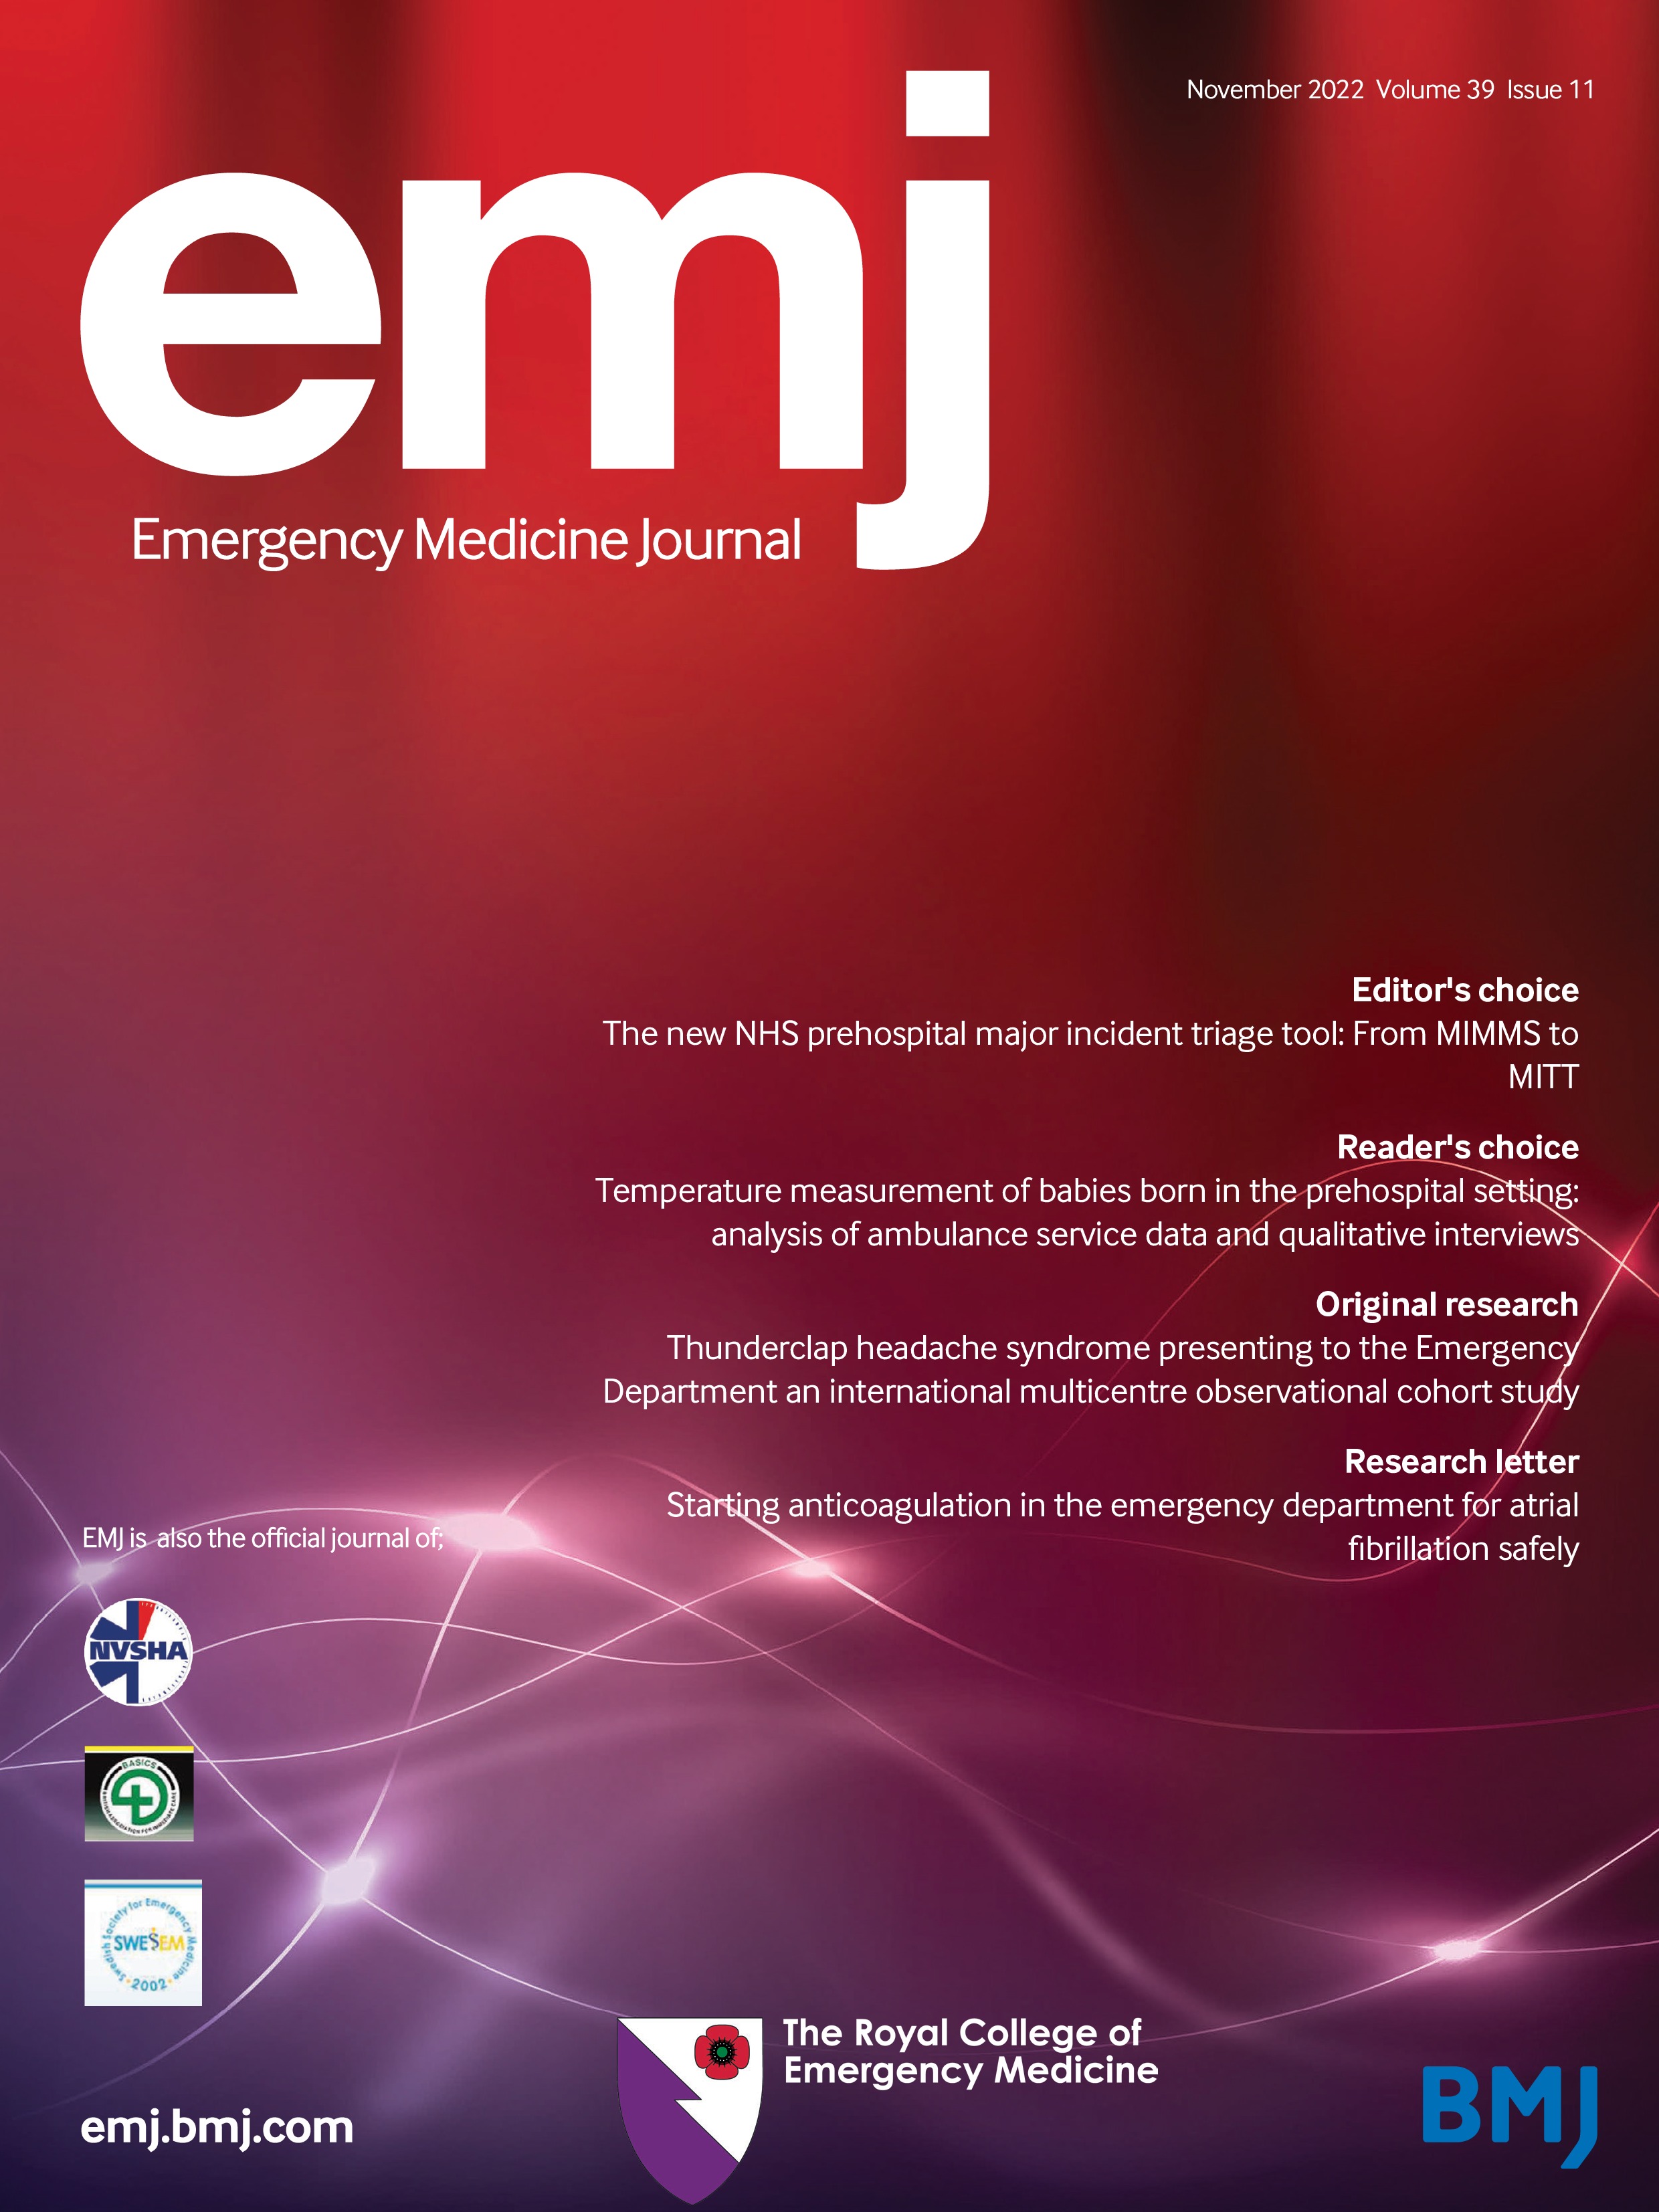 Management of patients presenting to the emergency department with sudden onset severe headache: systematic review of diagnostic accuracy studies